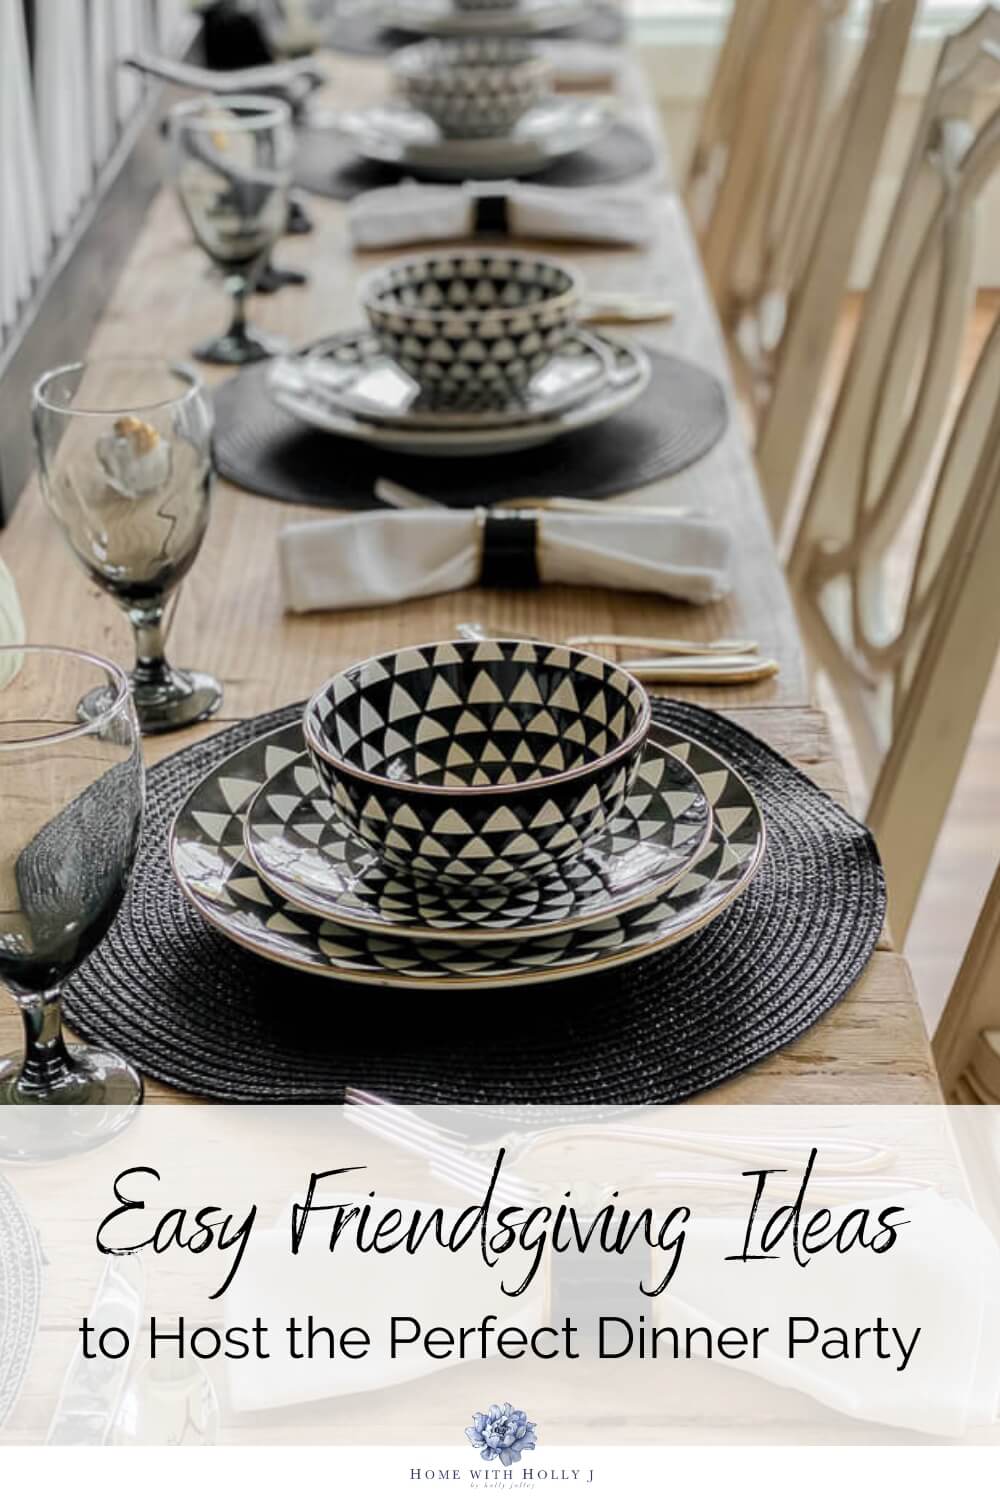 Learn my tried-and-true tips for hosting the perfect dinner party for your friendsgiving this year. Read more here.